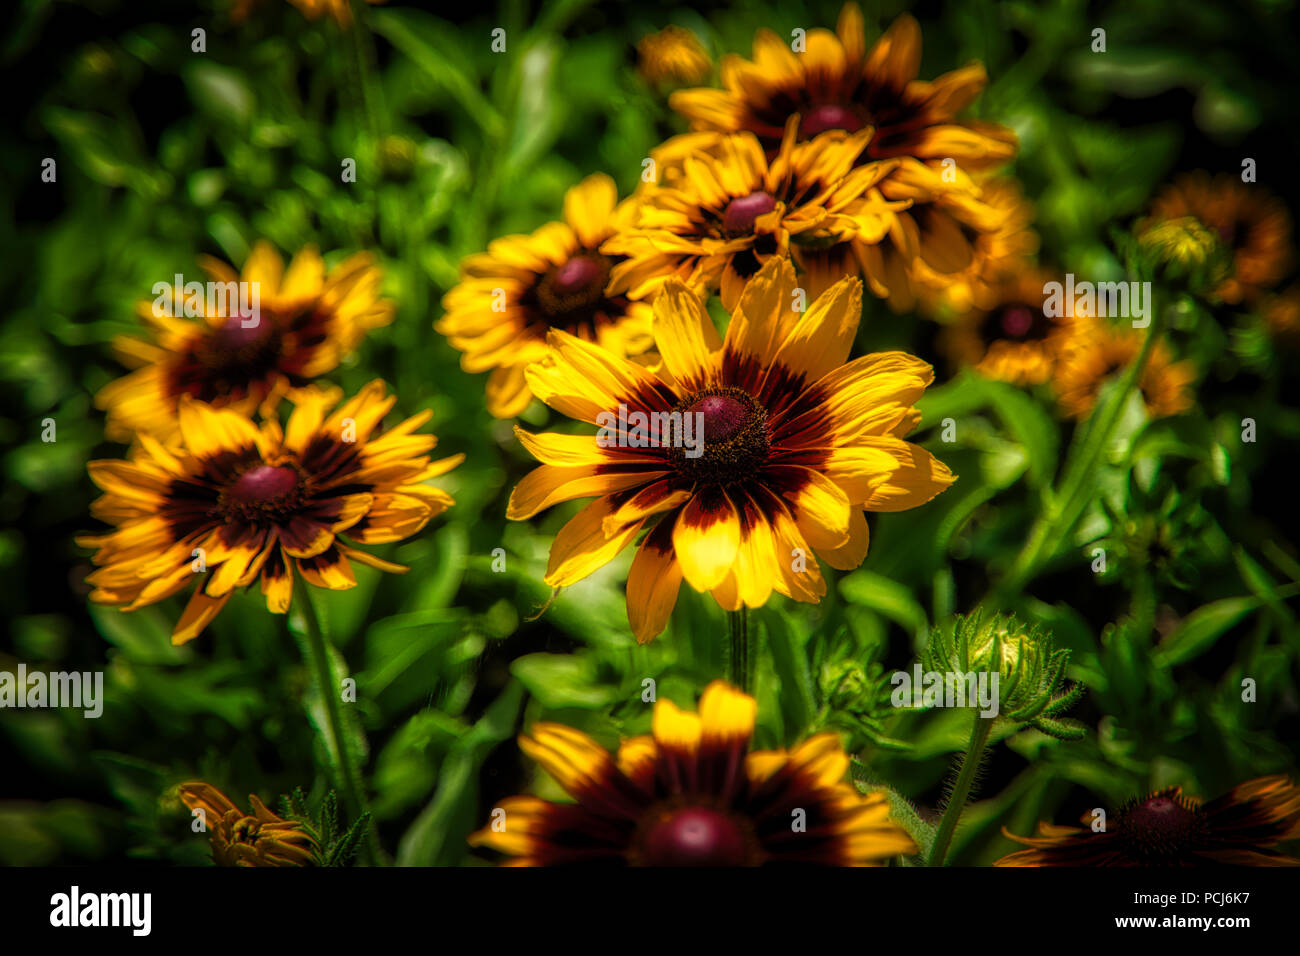 Flower, Daisy, Yellow, Garden, Nature, Floral, outdoors, summer, plants, countryside, fresh, blossom, wildflower, Stock Photo